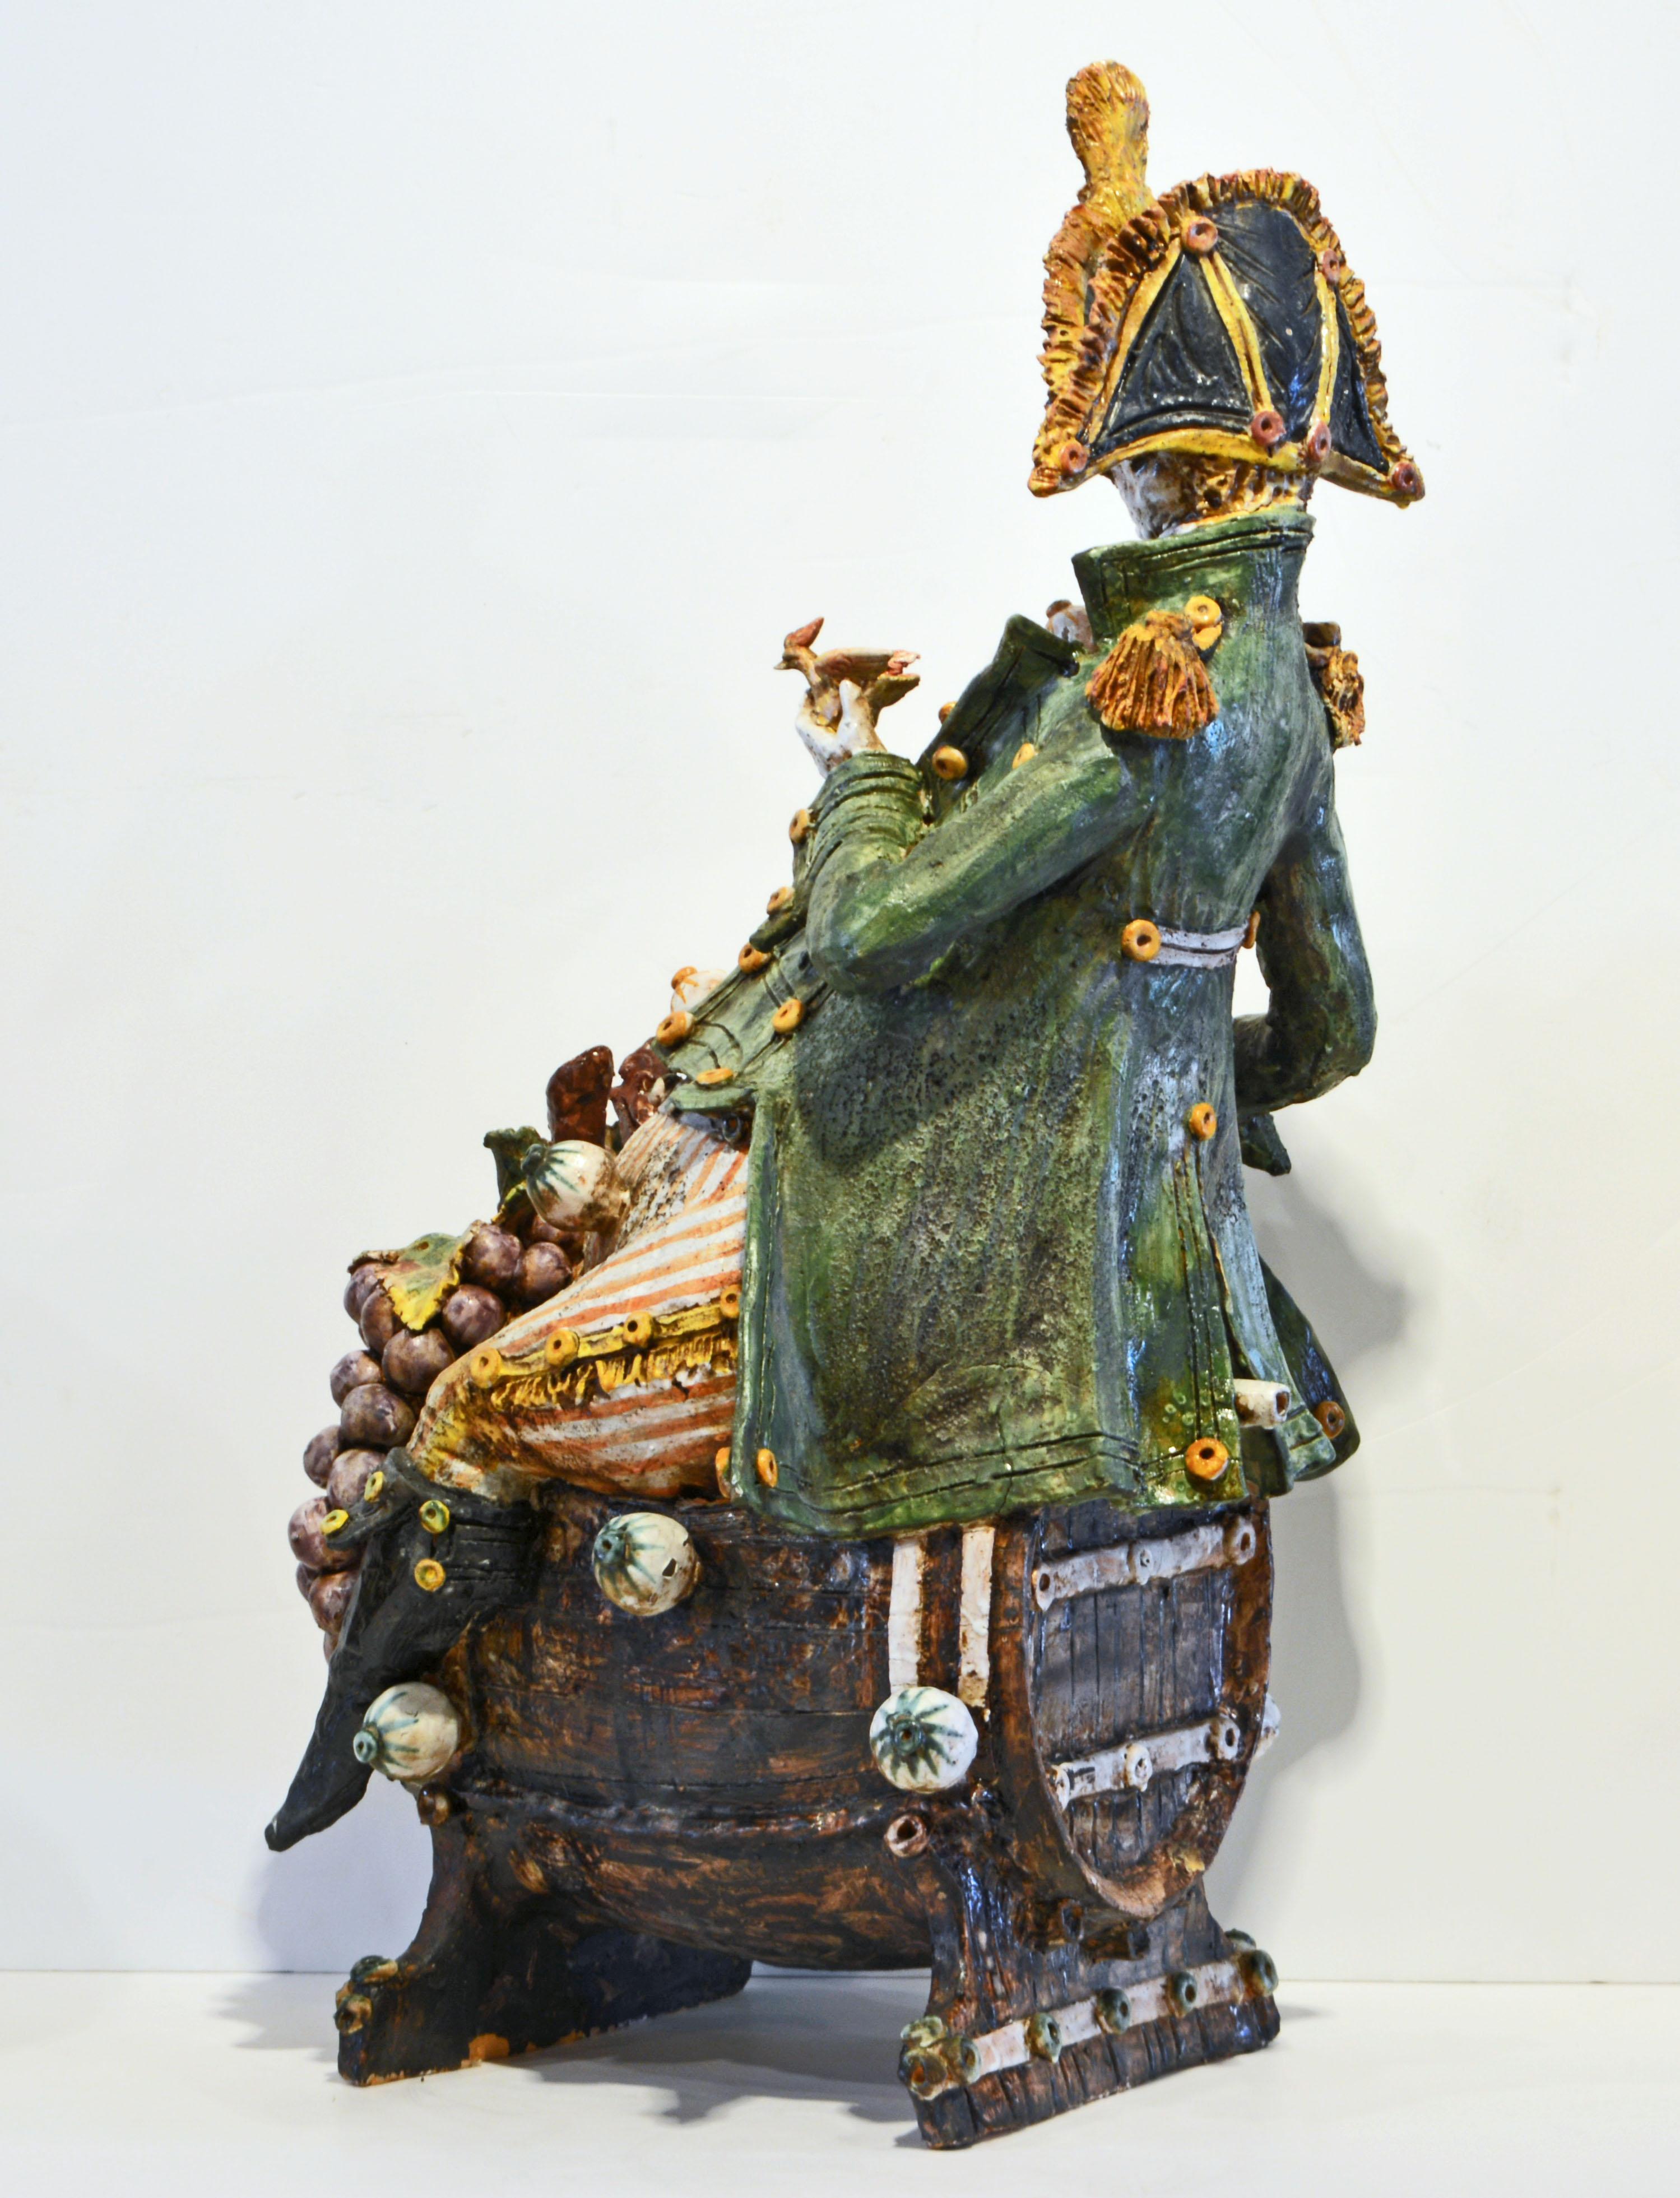 Post-Modern Large Italian Glazed Ceramic Sculpture of a Drinking General by Diego Poloniato